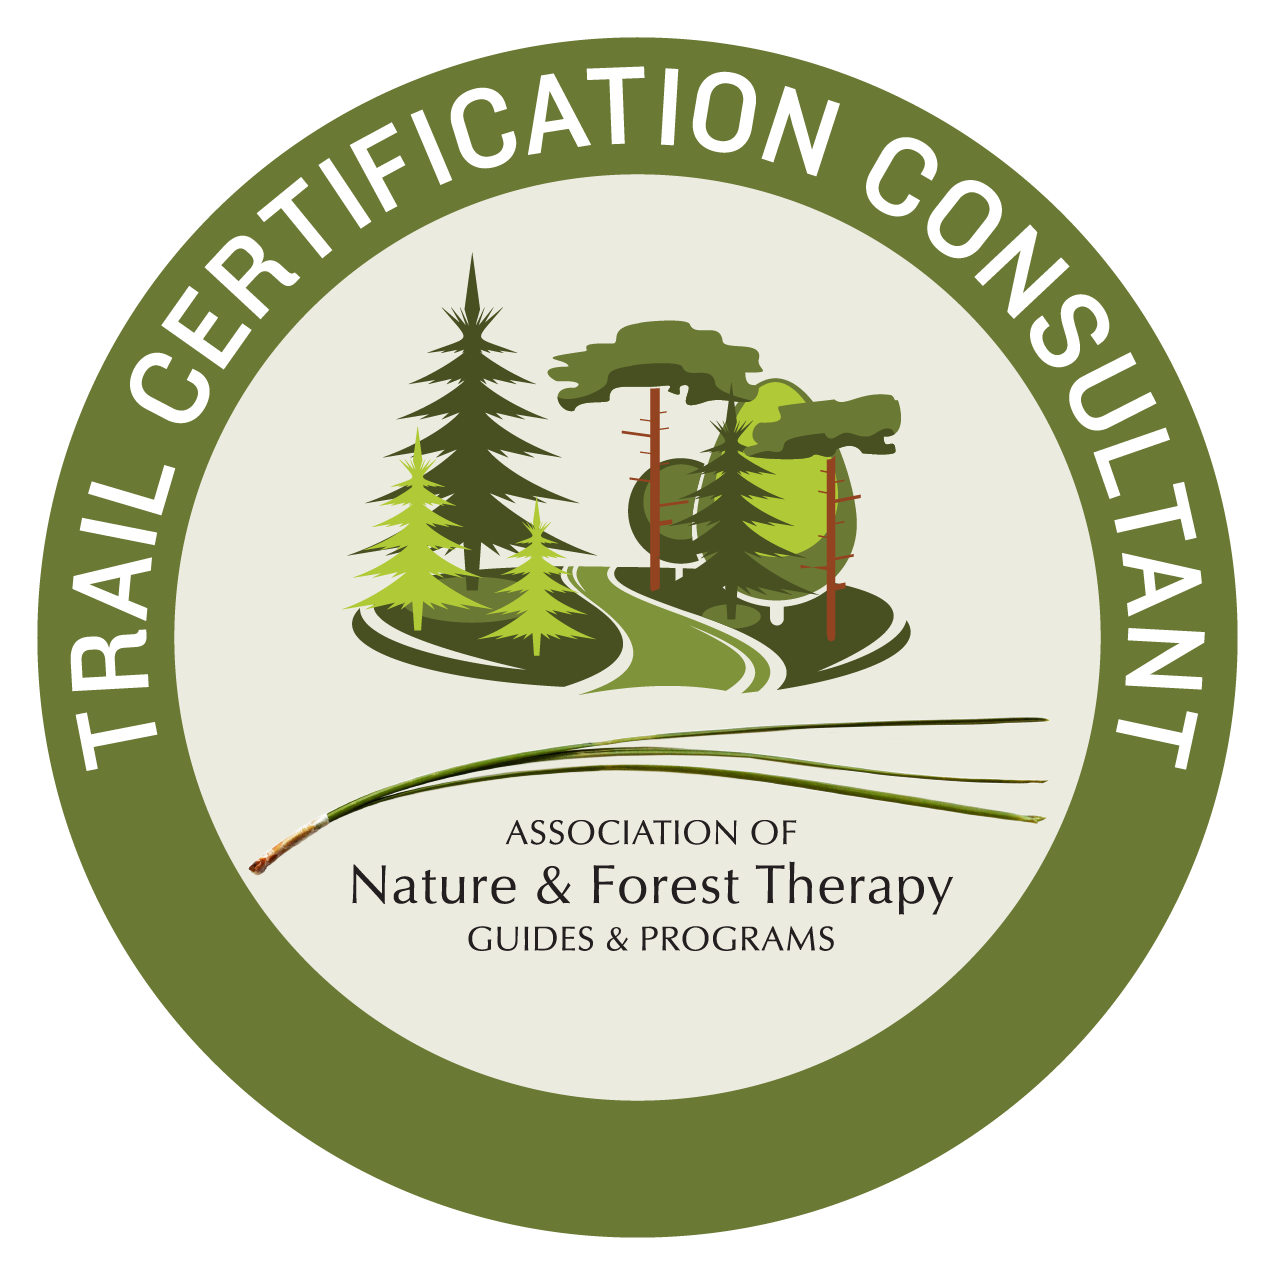 ANFT LOGO_TRAIL CERTIFICATION CONSULTANT_300dpi.png